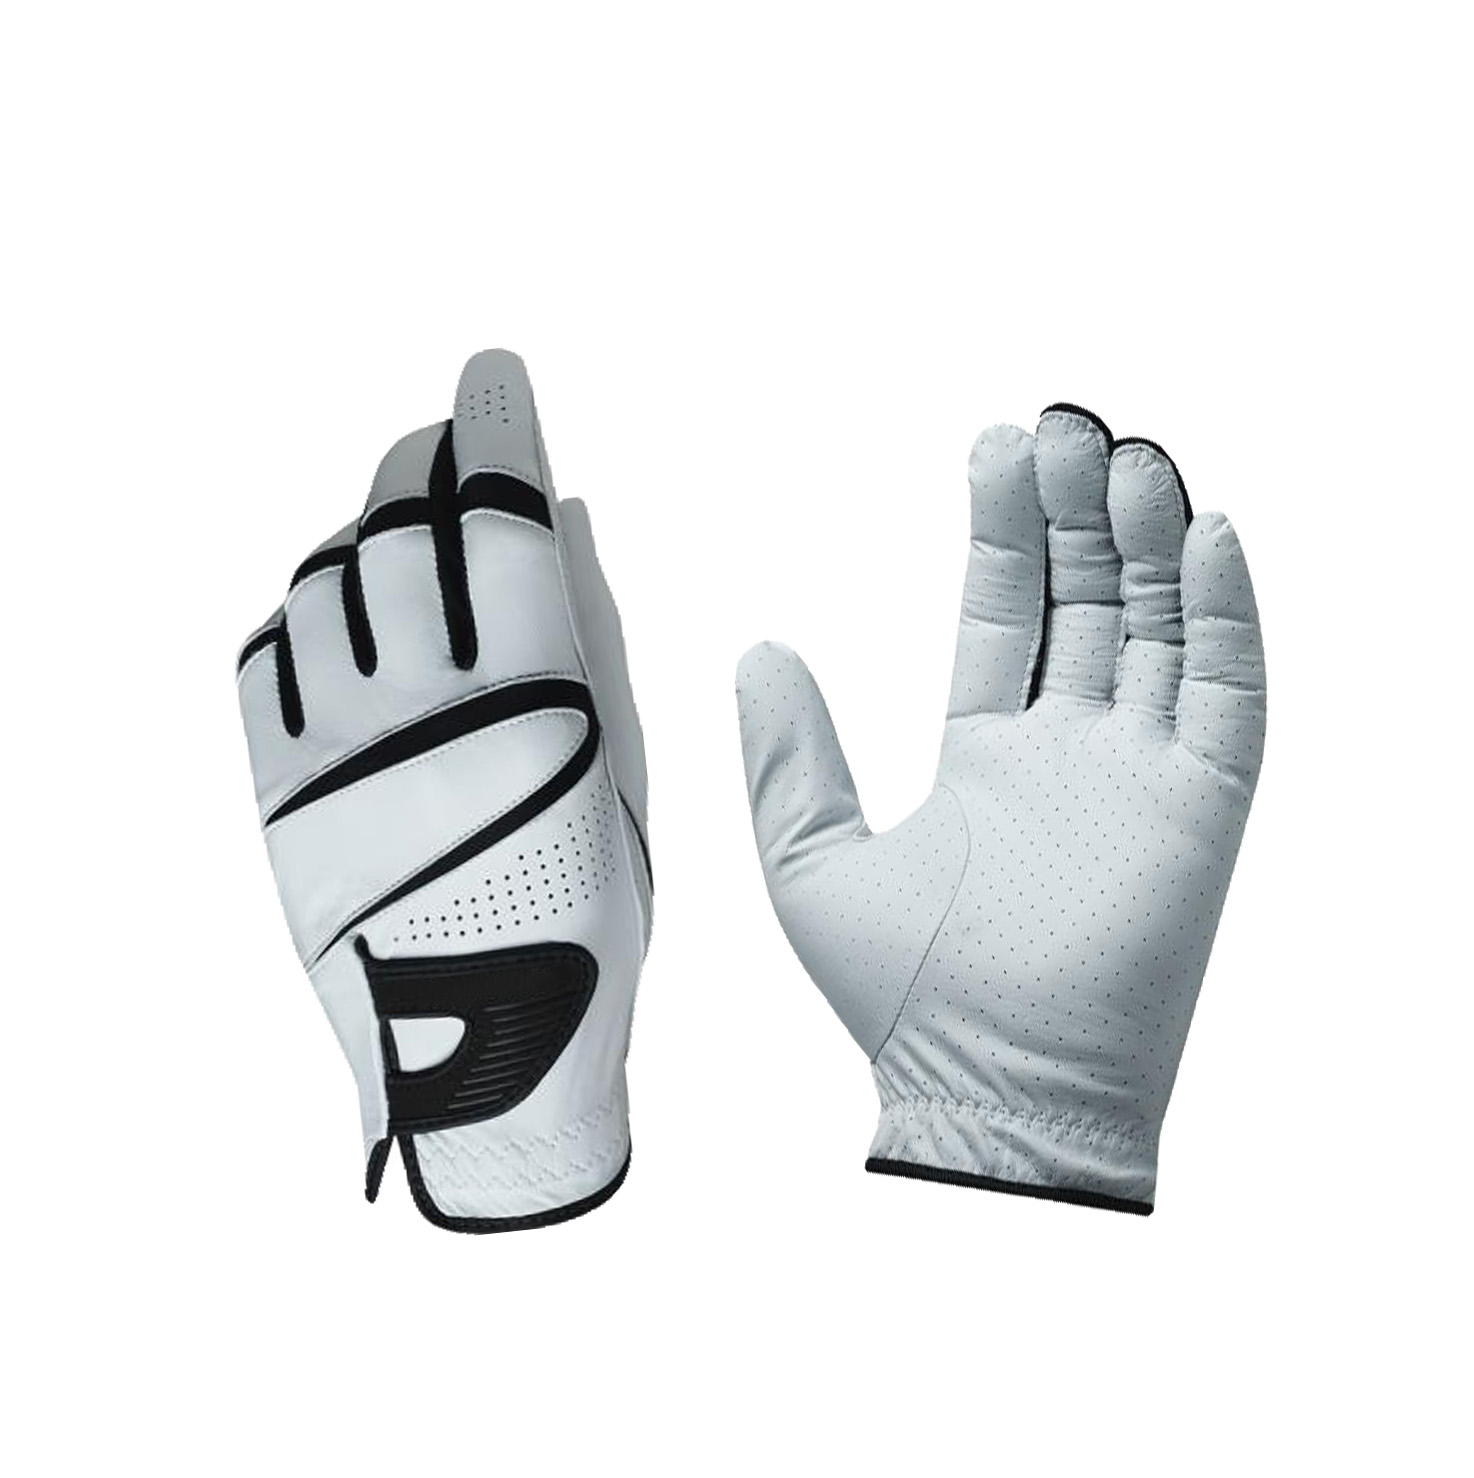 Sports golf gloves all weather golf gloves New style durable